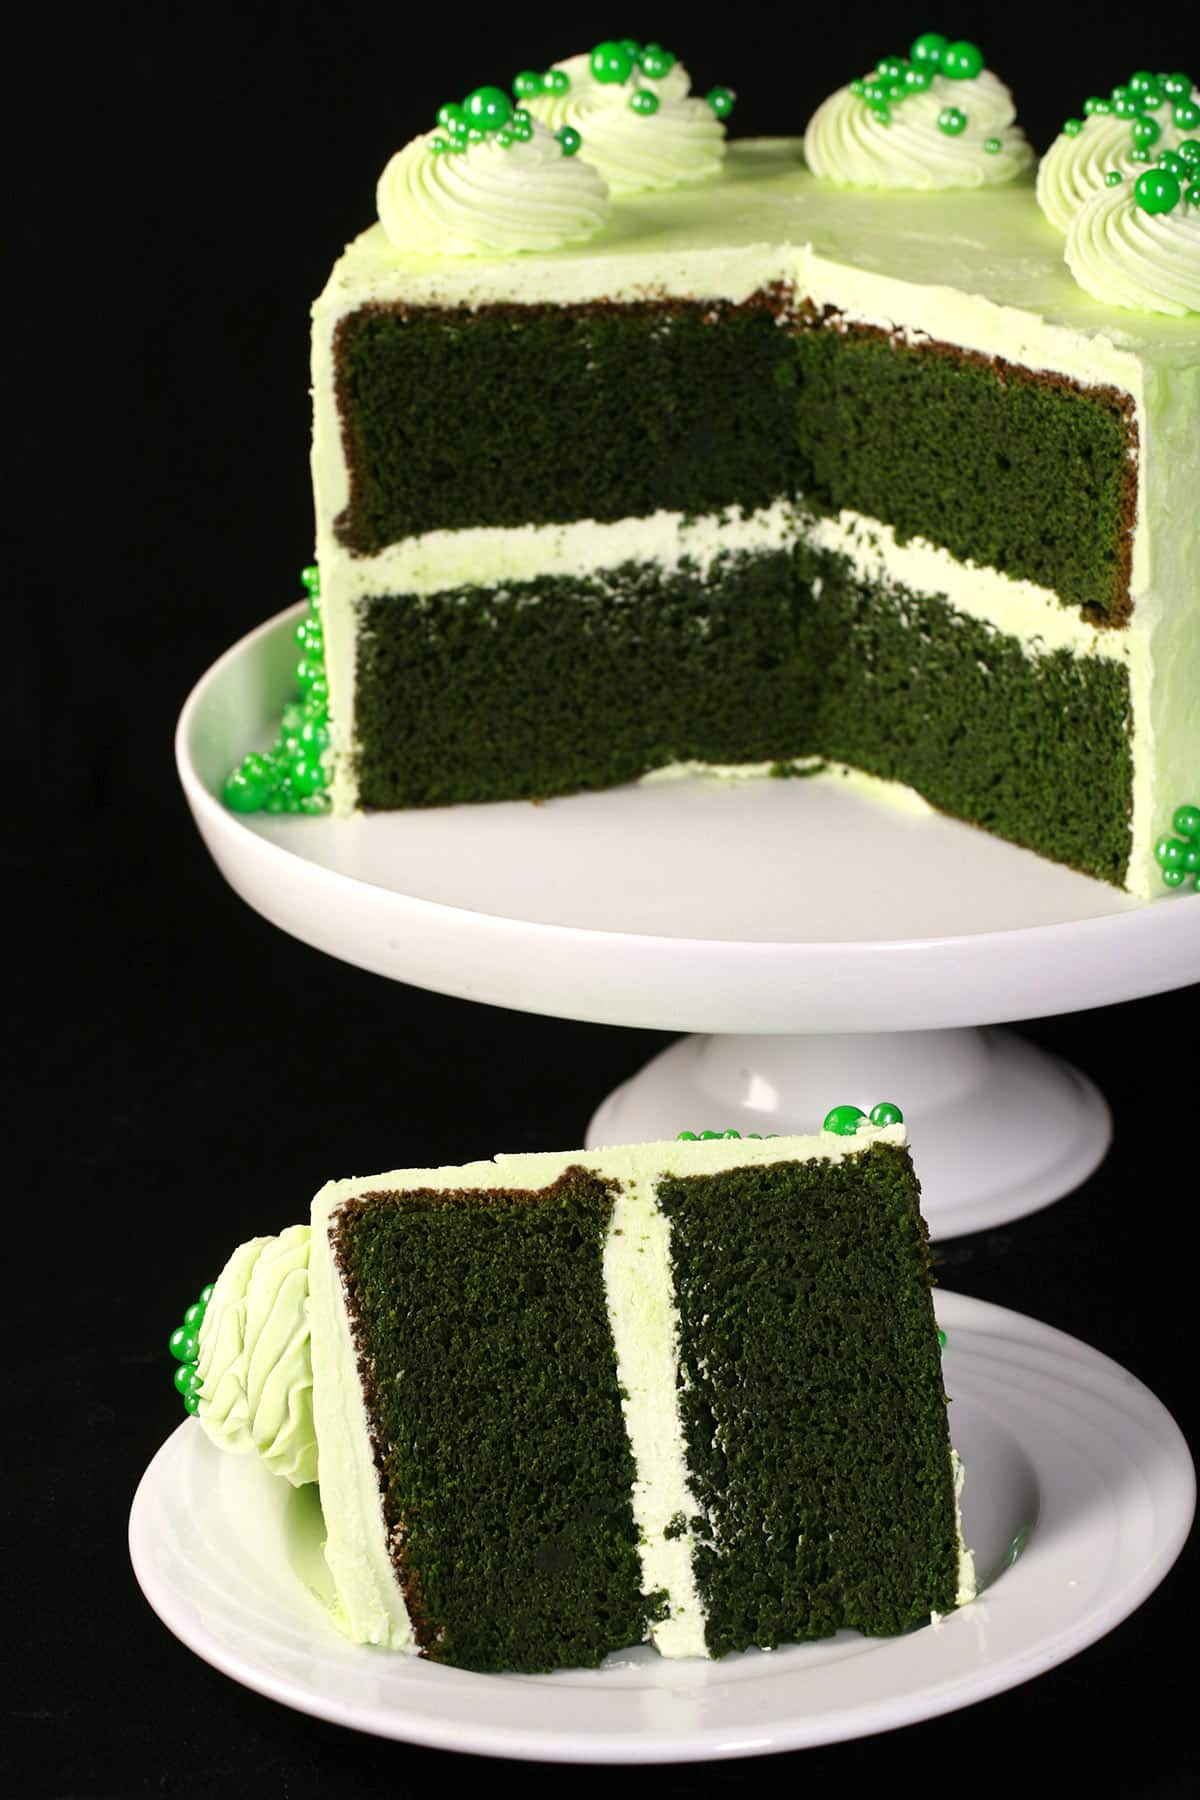 A slice of green velvet cake on a plate in front of the rest of the cake.